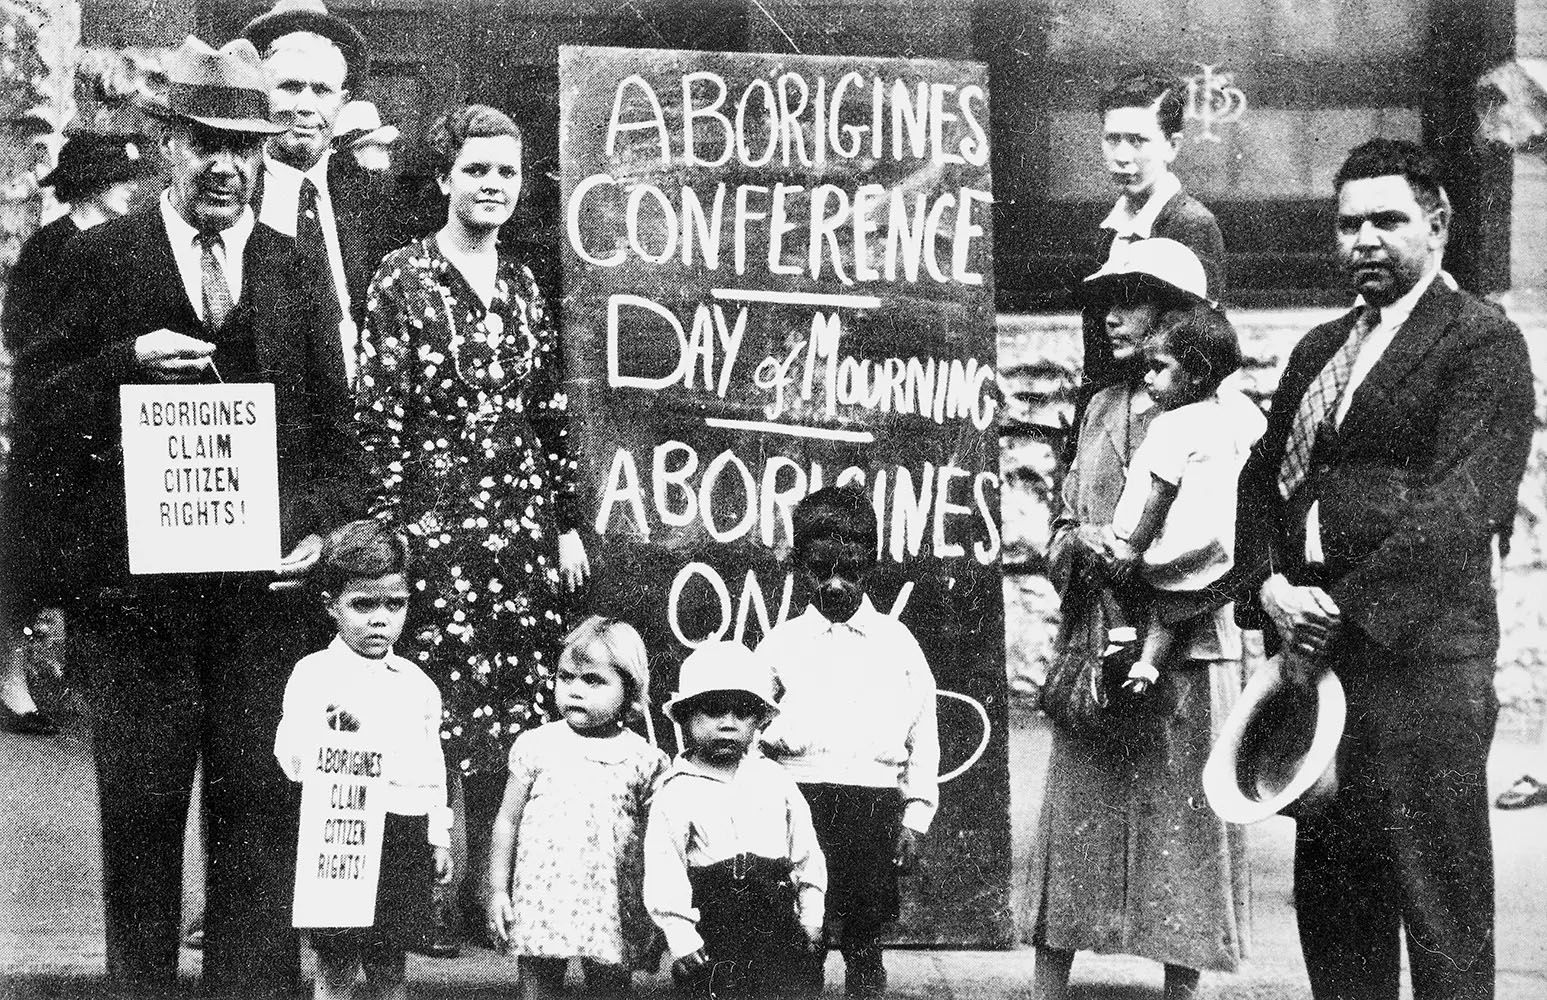 'Day of Mourning' Aboriginal meeting on 26 January 1938 at Australian Hall, Sydney, NSW